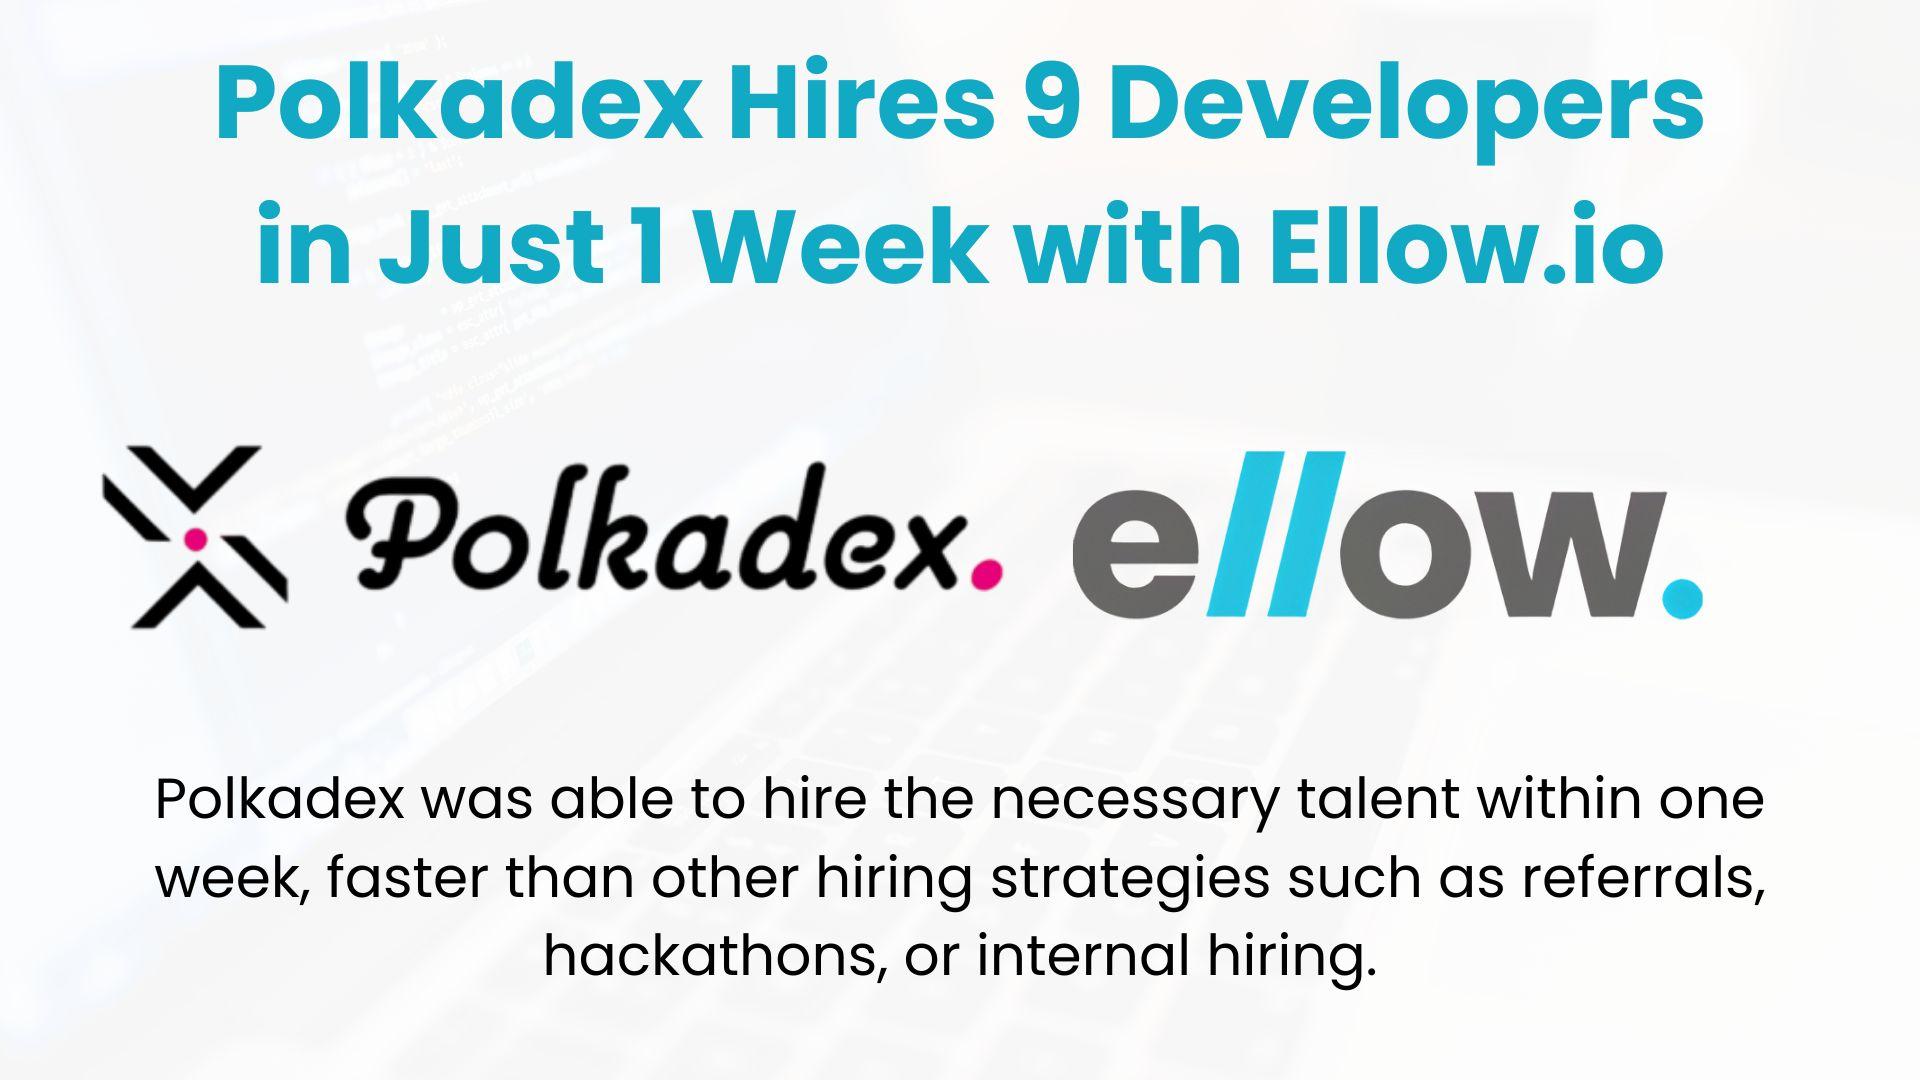 Polkadex Hires 9 Developers in Just 1 Week with Ellow.io